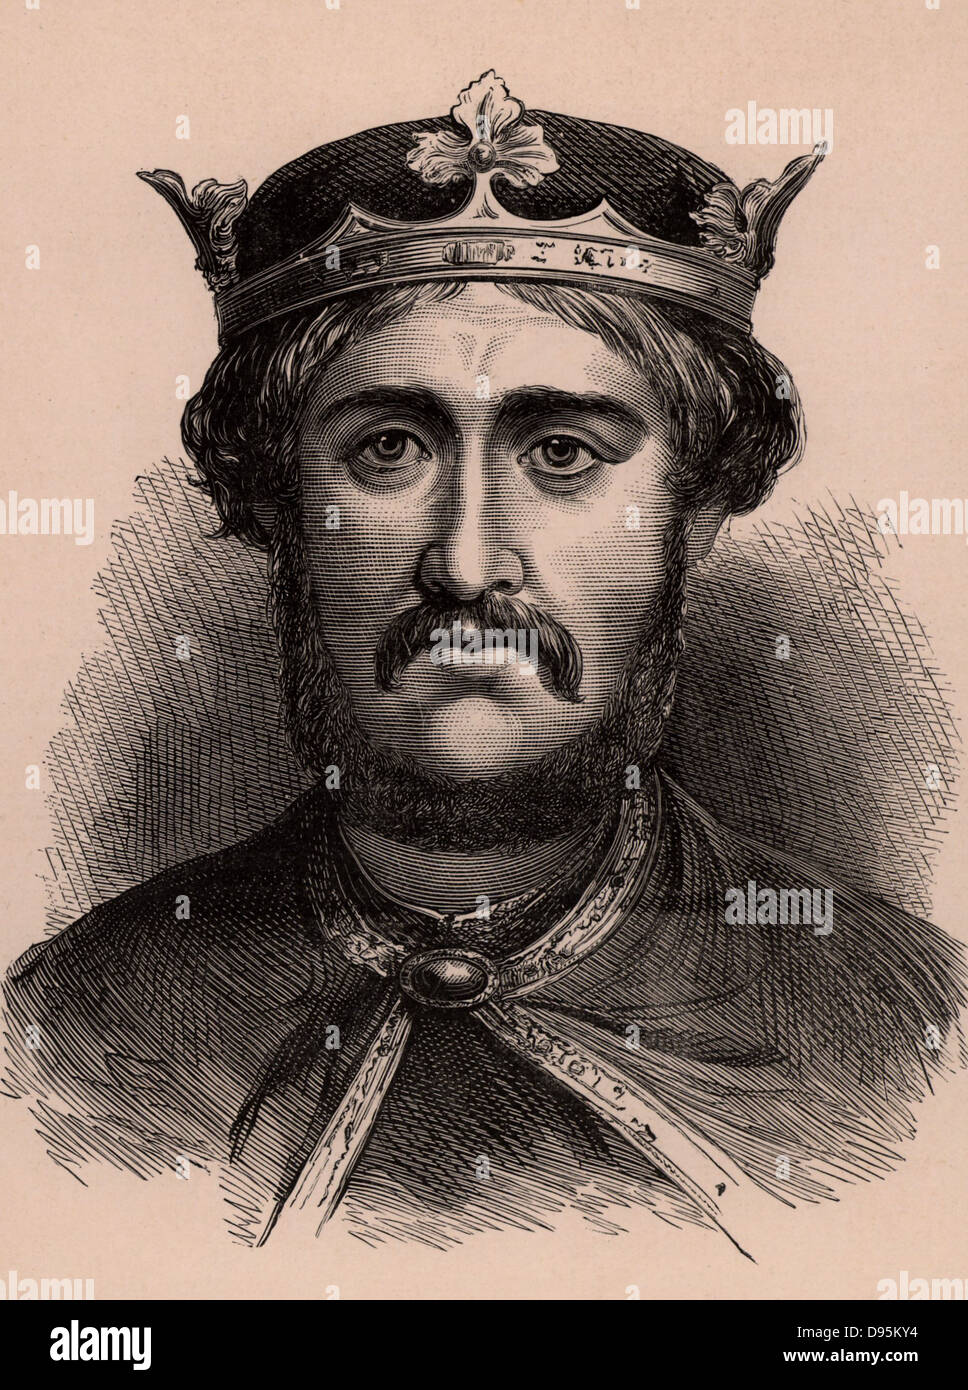 Richard I, Coeur de Lion (1157-1199) king of England from 1189; son of Henry II and Eleanor of Aquitaine. A member of the Angevin dynasty.  Wood engraving c1900. Stock Photo